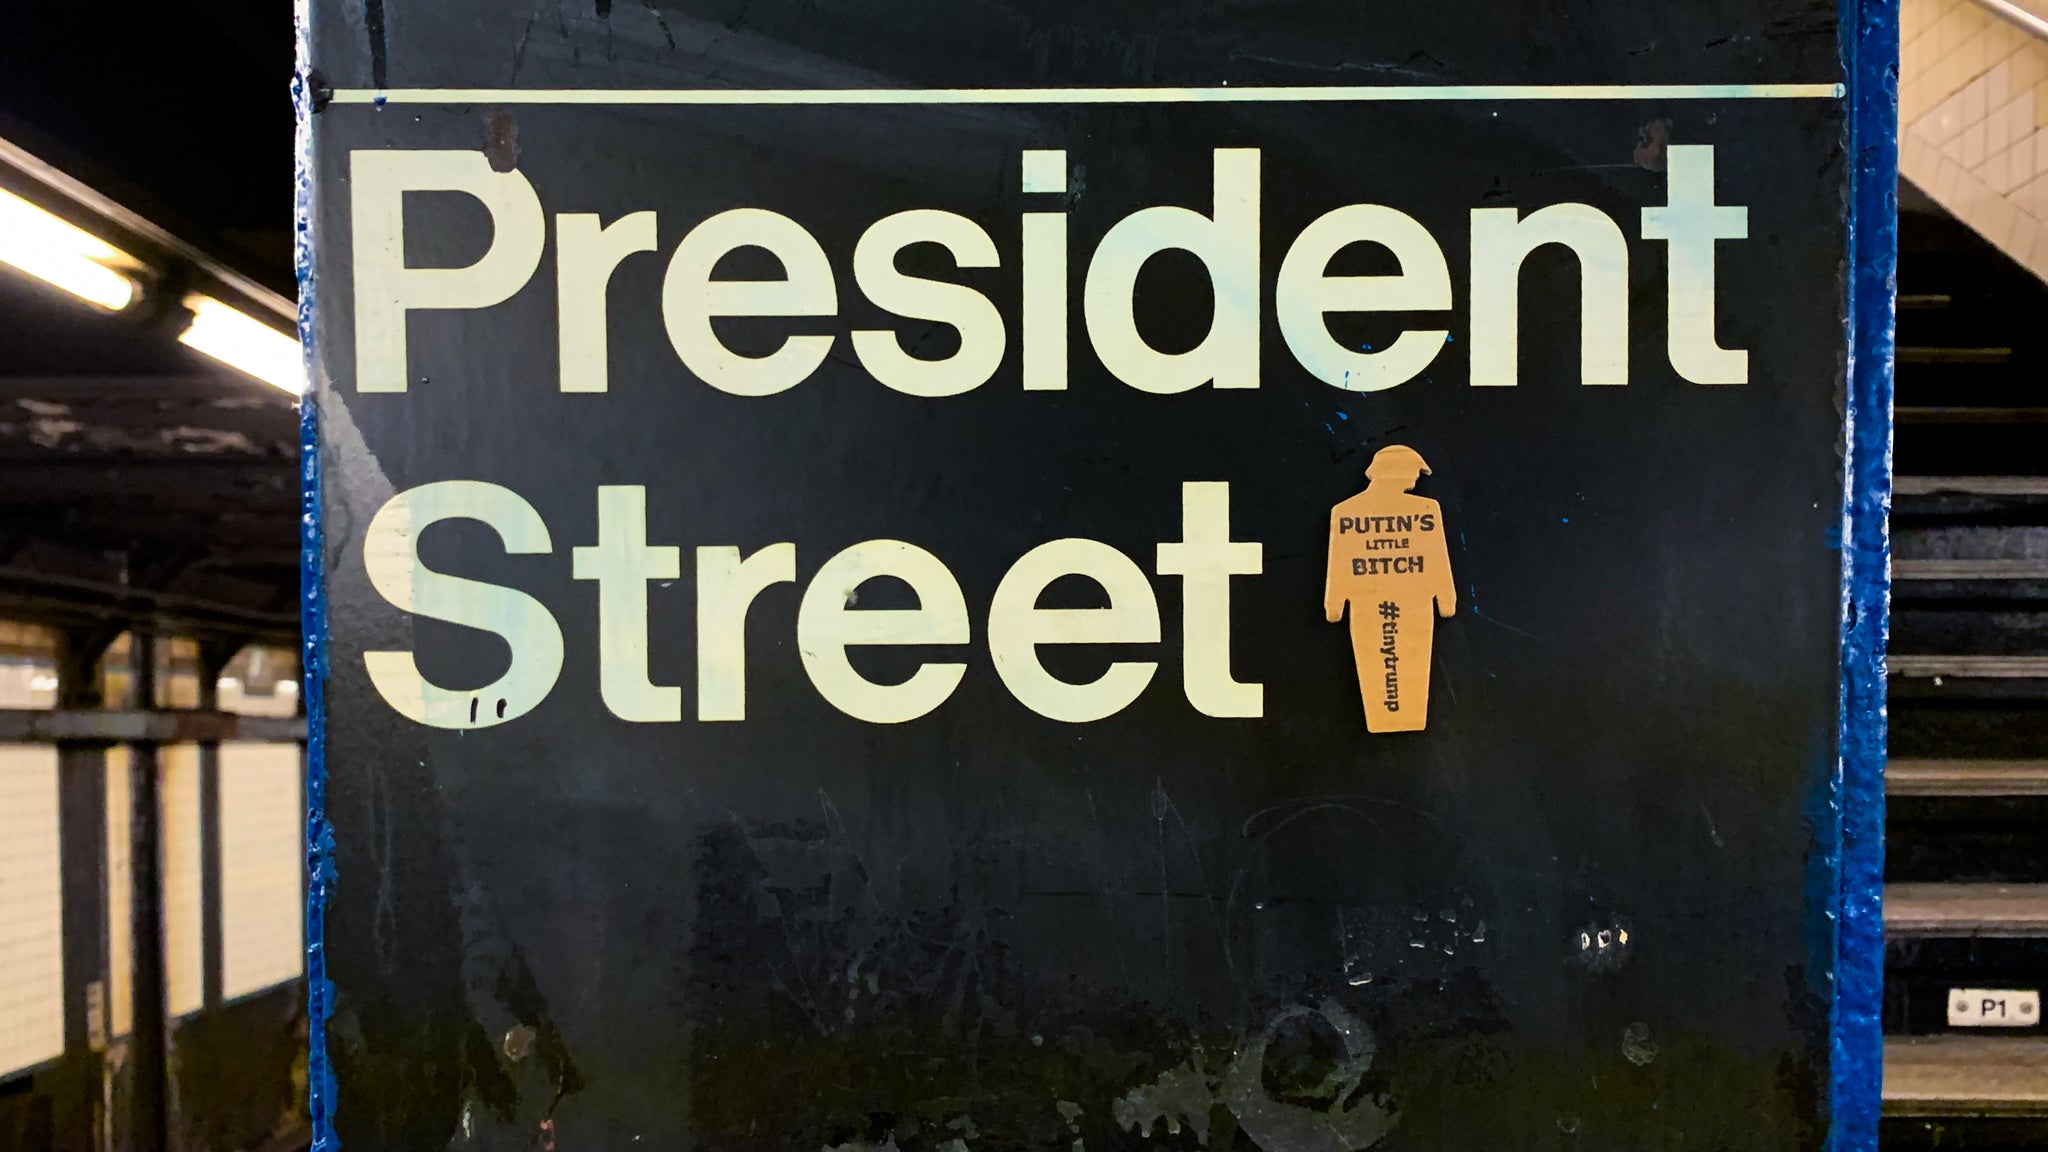 tiny trump with the slogan "Putin's Little Bitch" stuck to a NYC subway sign indicating "President Street"